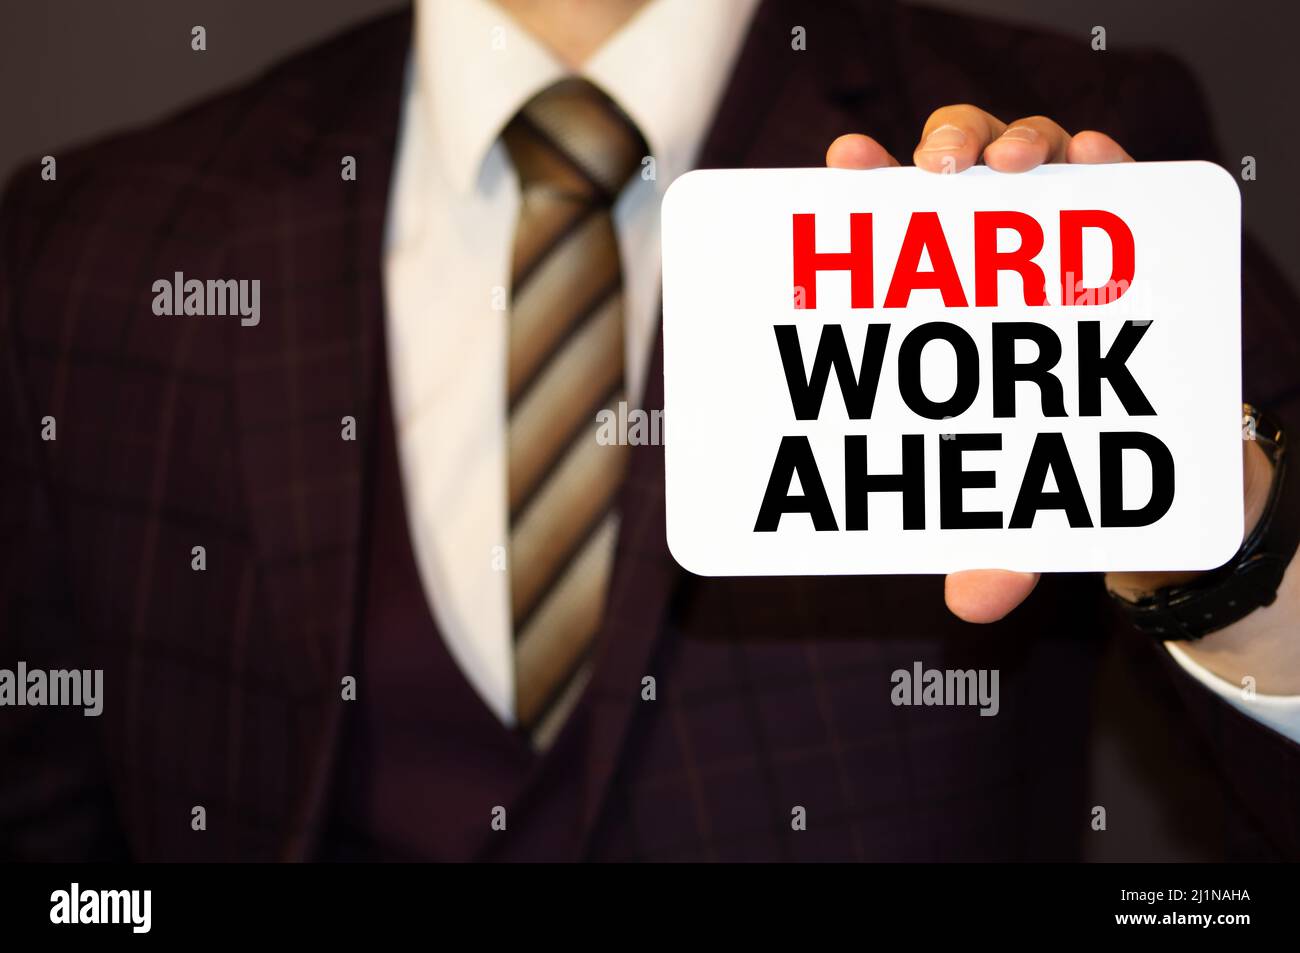 Red Hard work ahead warning sign with copy space. Business concept on Hard work for successful in career. Making a motivative decision on the future b Stock Photo